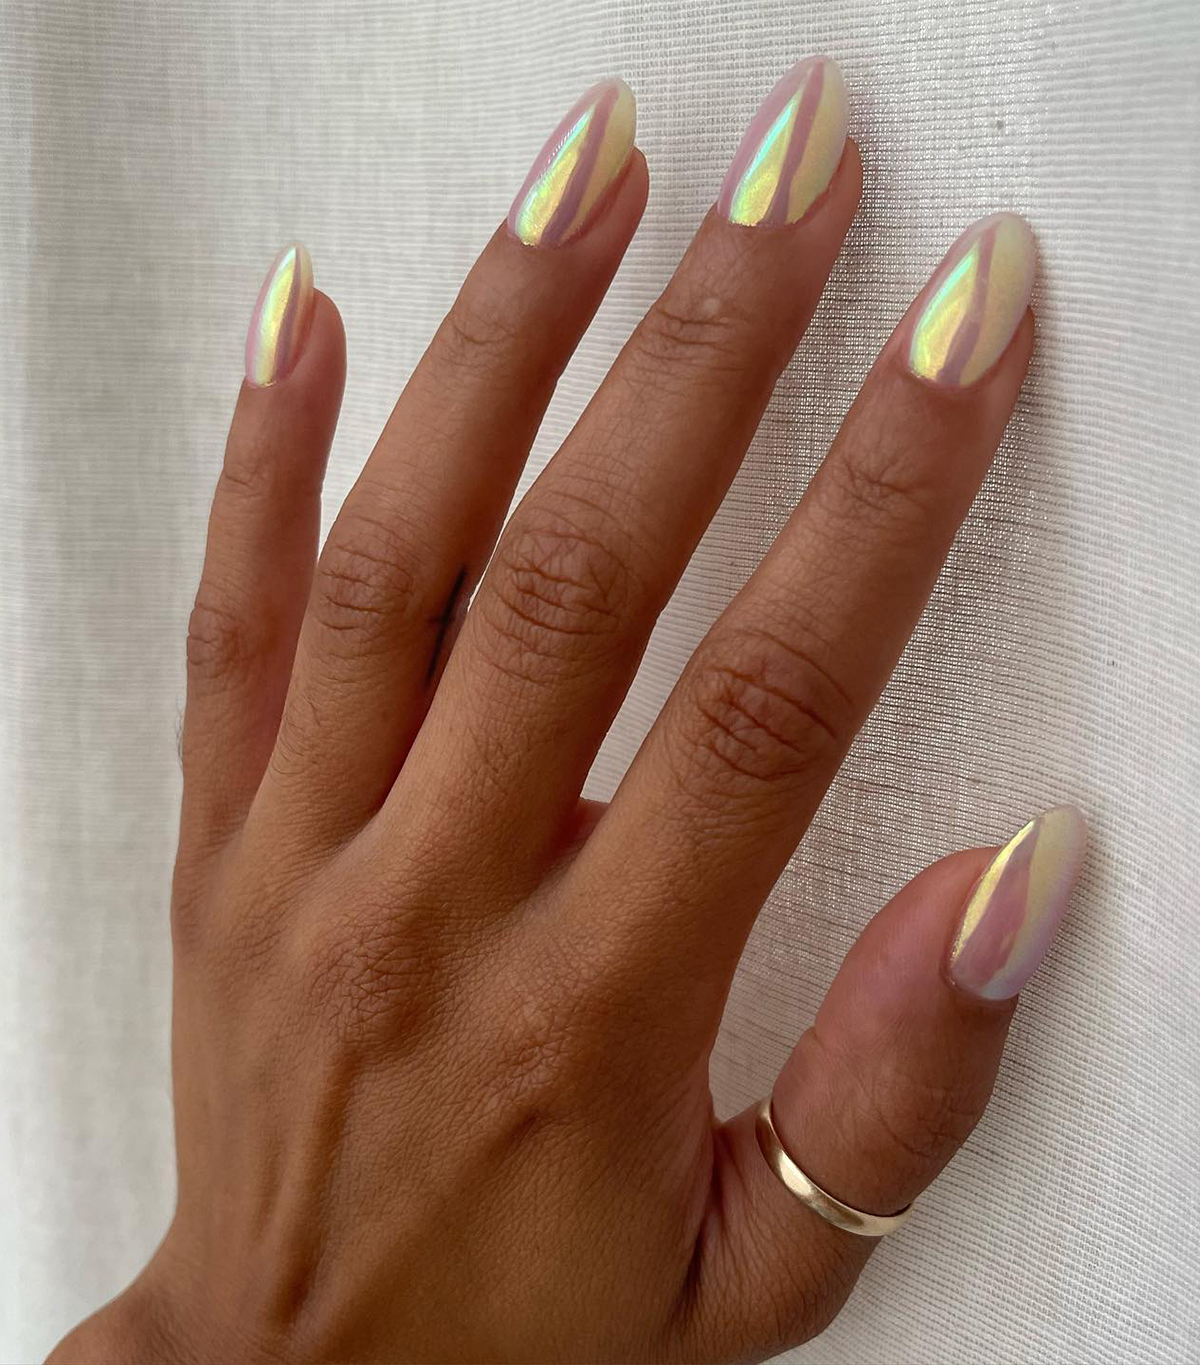 25 Pink Nail Designs To Screenshot For Your Next Manicure | Who What Wear